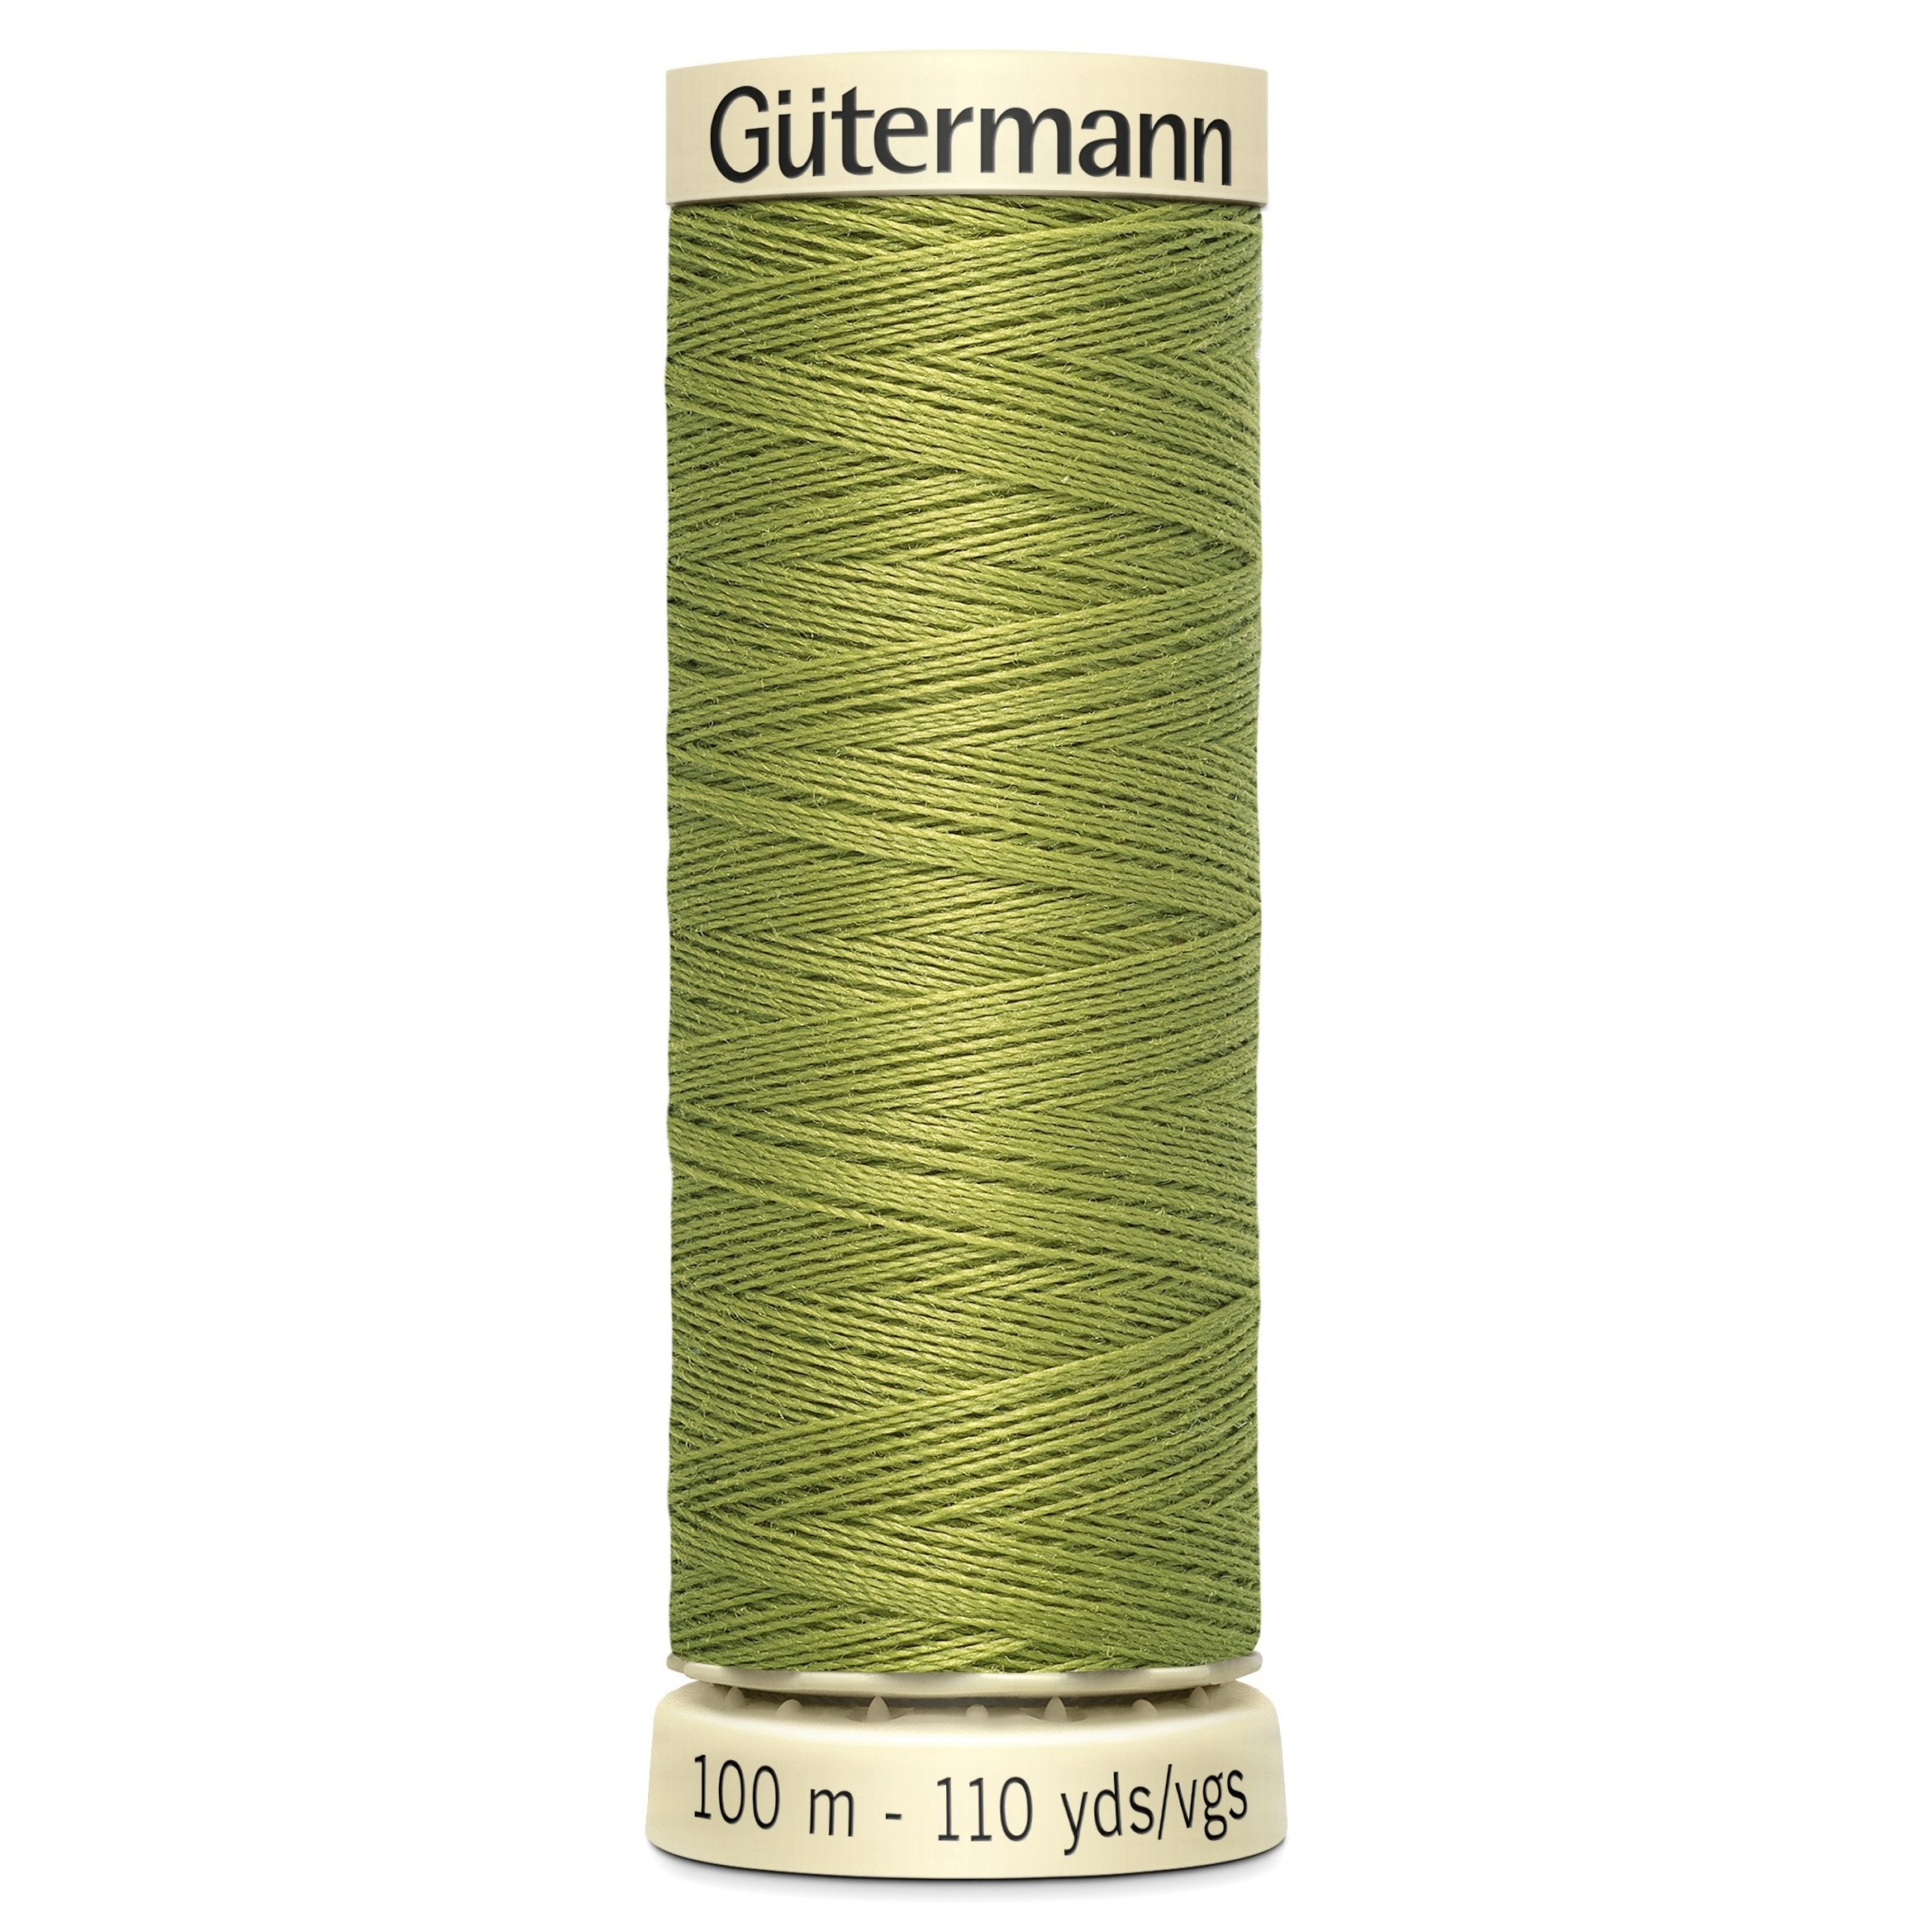 Gutermann Sew All Thread colour 582 Khaki from Jaycotts Sewing Supplies